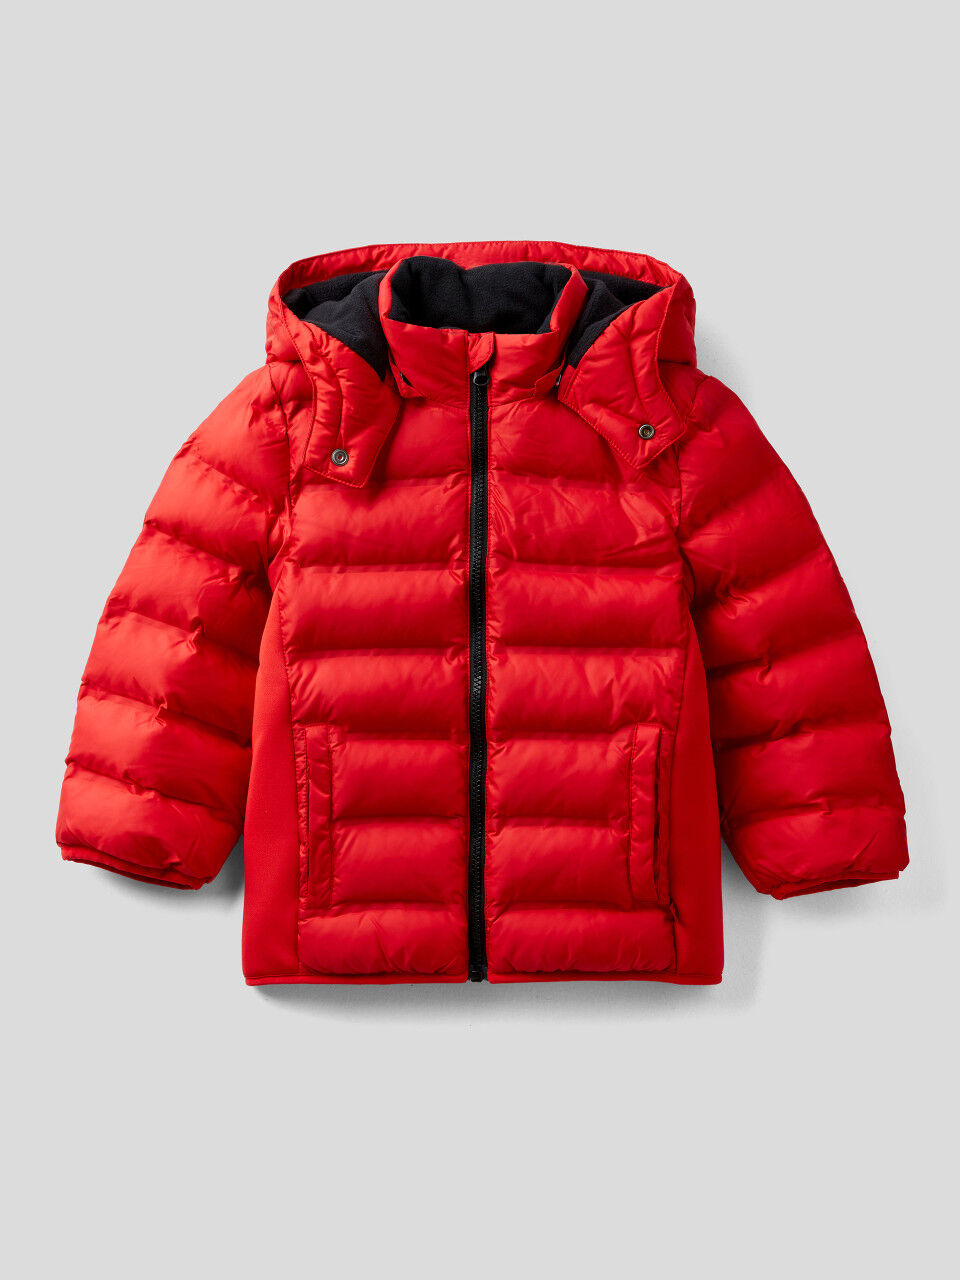 Age 1 Benetton Baby Benetton Red Gillet Puffer.hooded Blue lining 